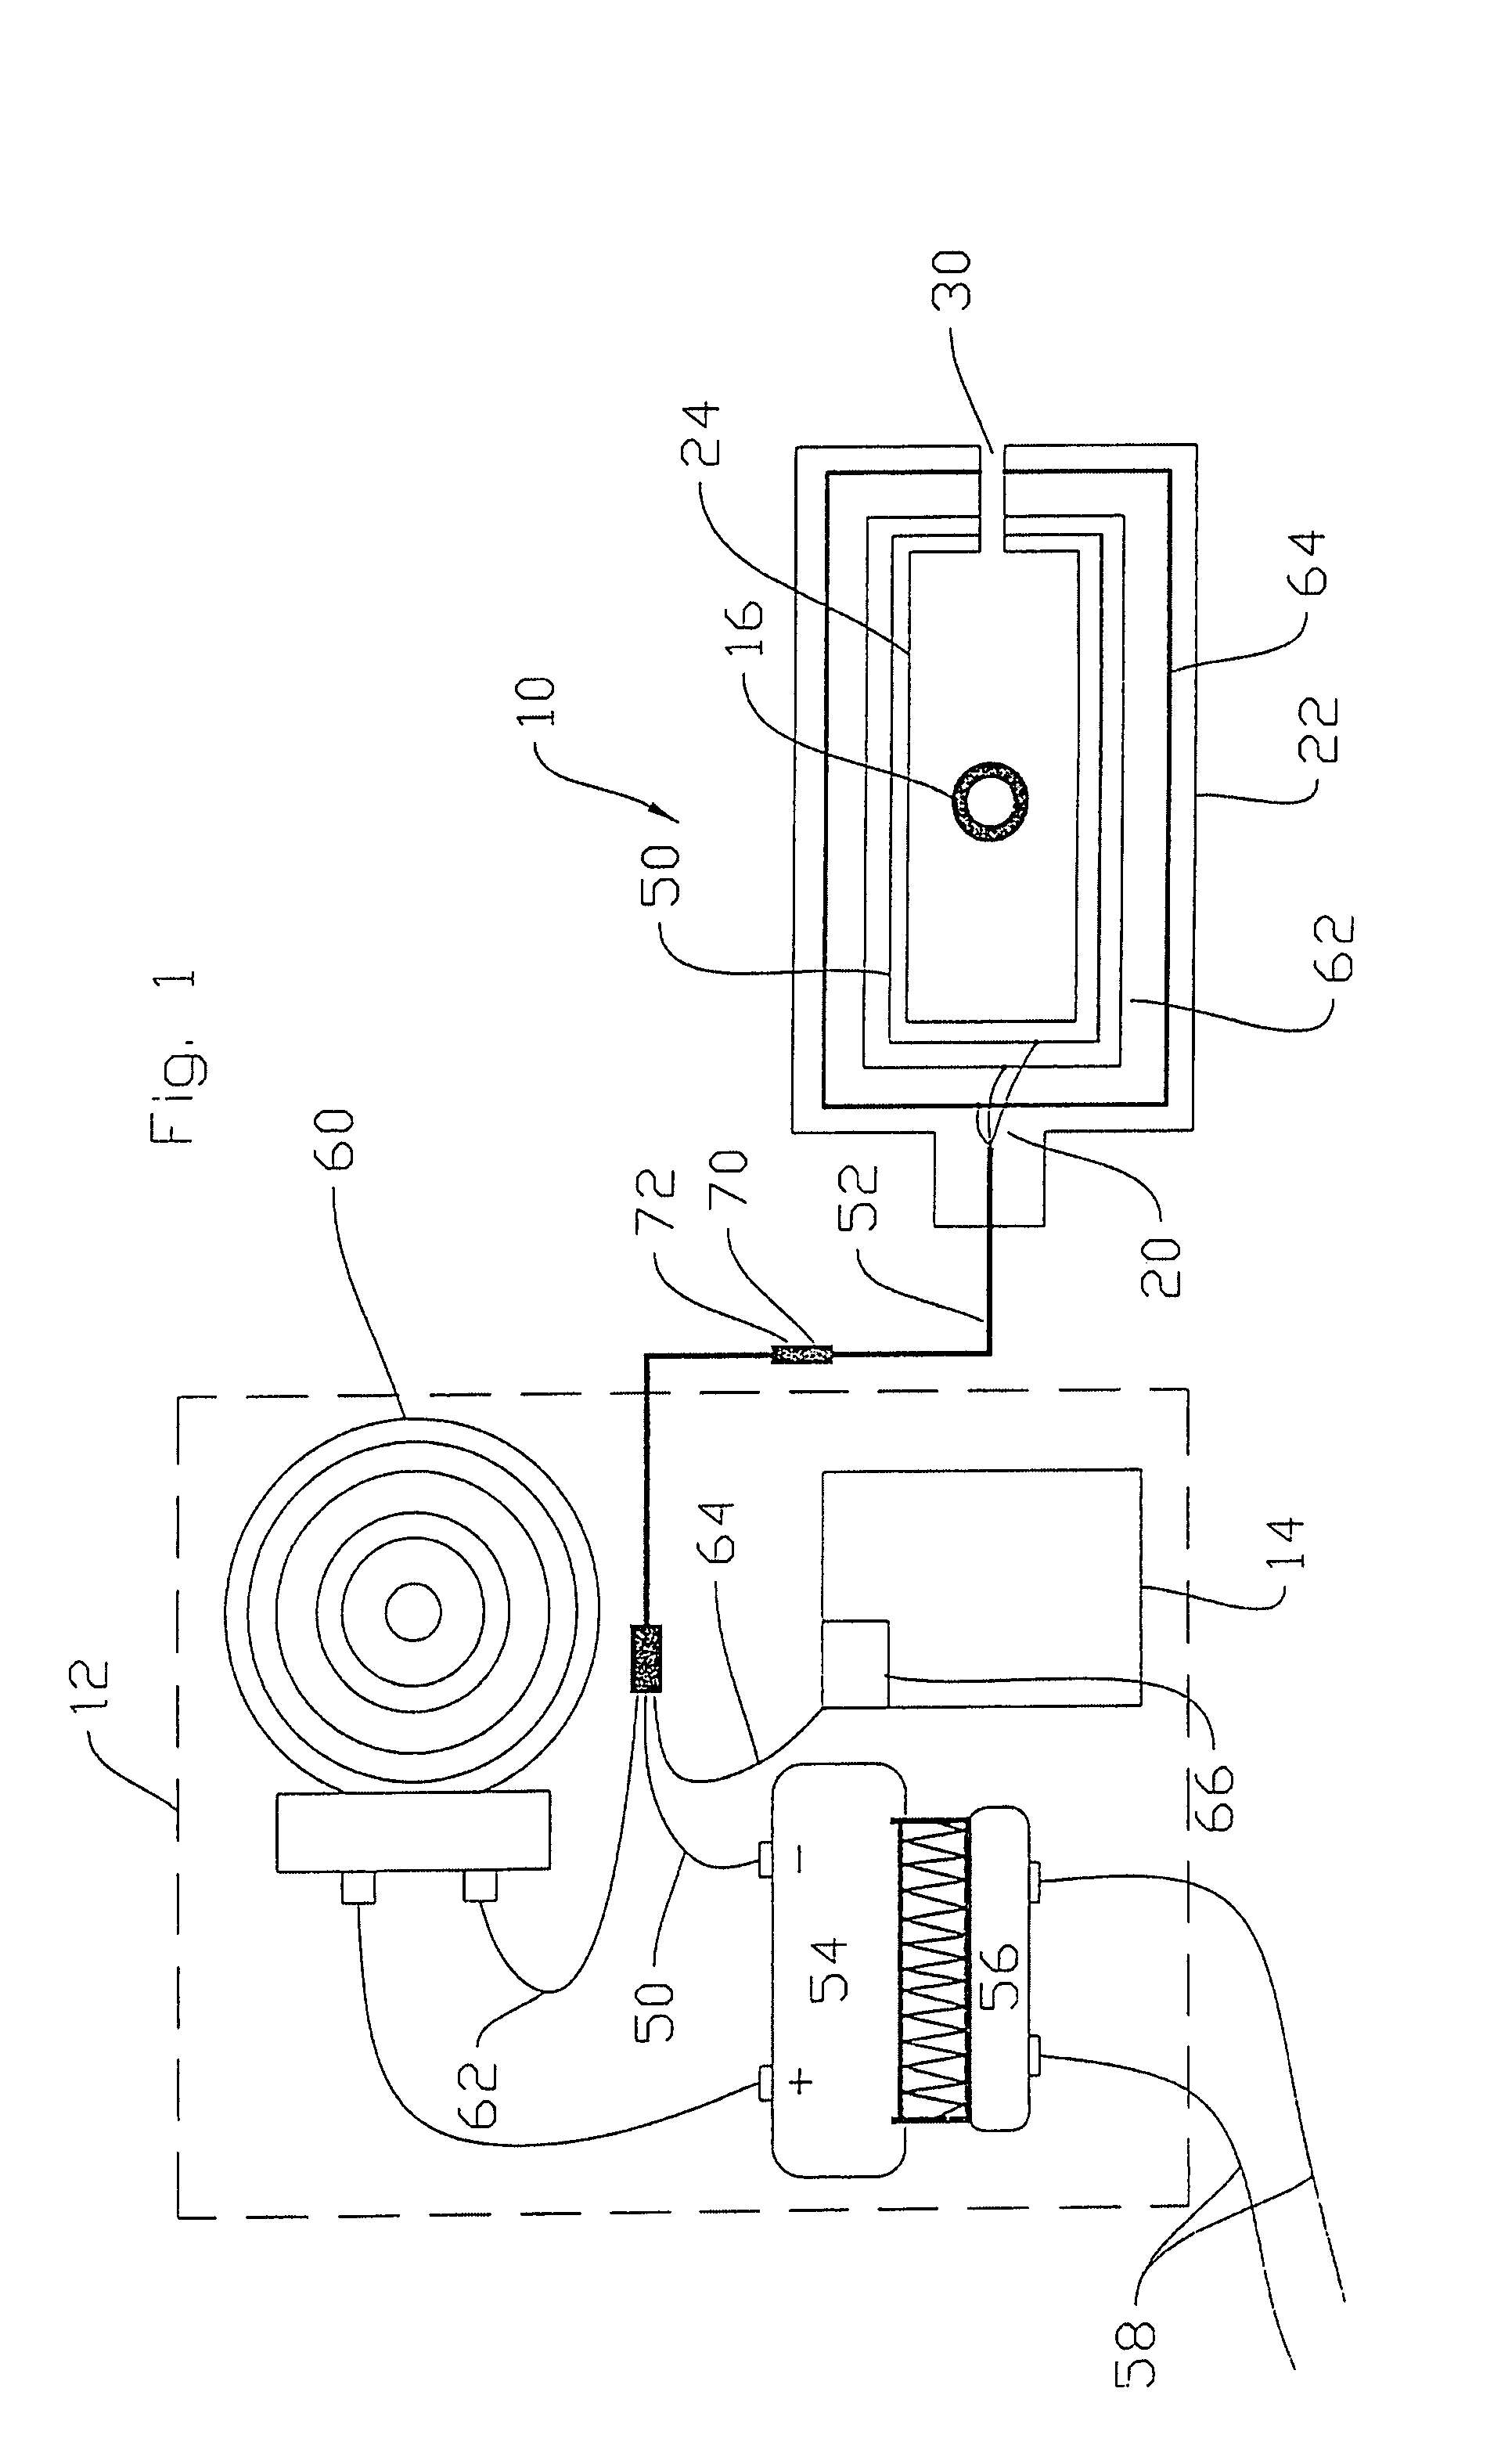 Dressing and integrated system for detection of fluid loss